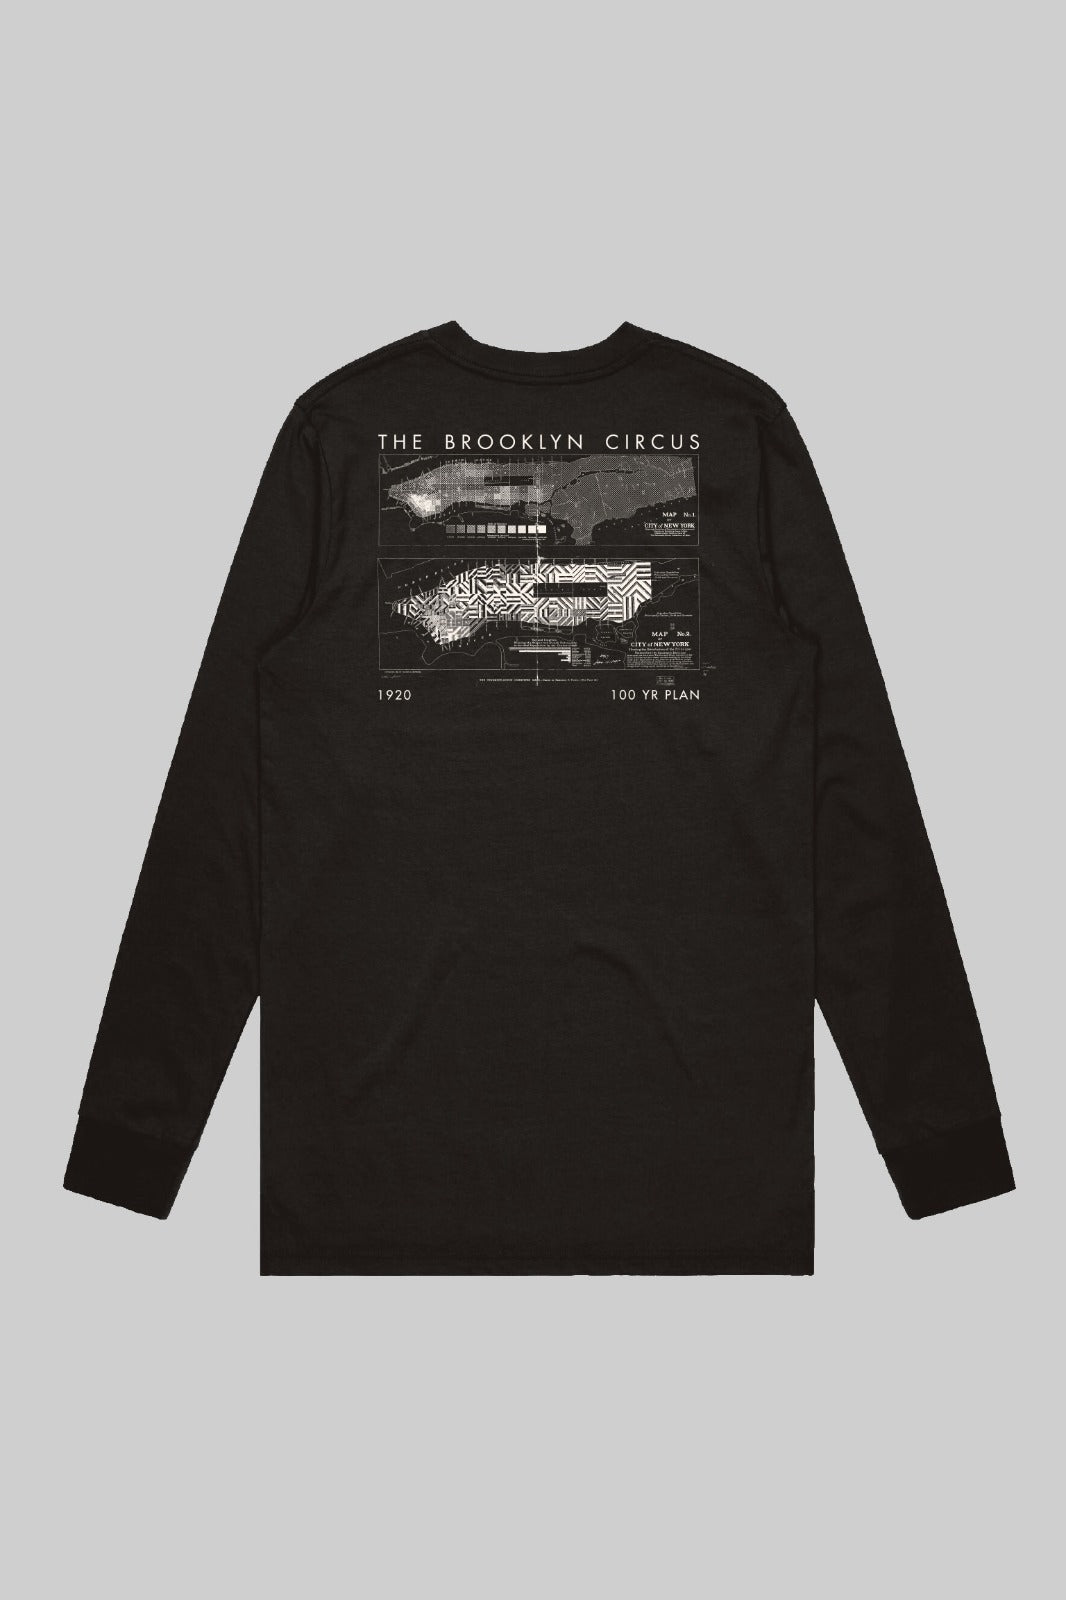 BKc Canal NYc Map L/S (Black Tee)